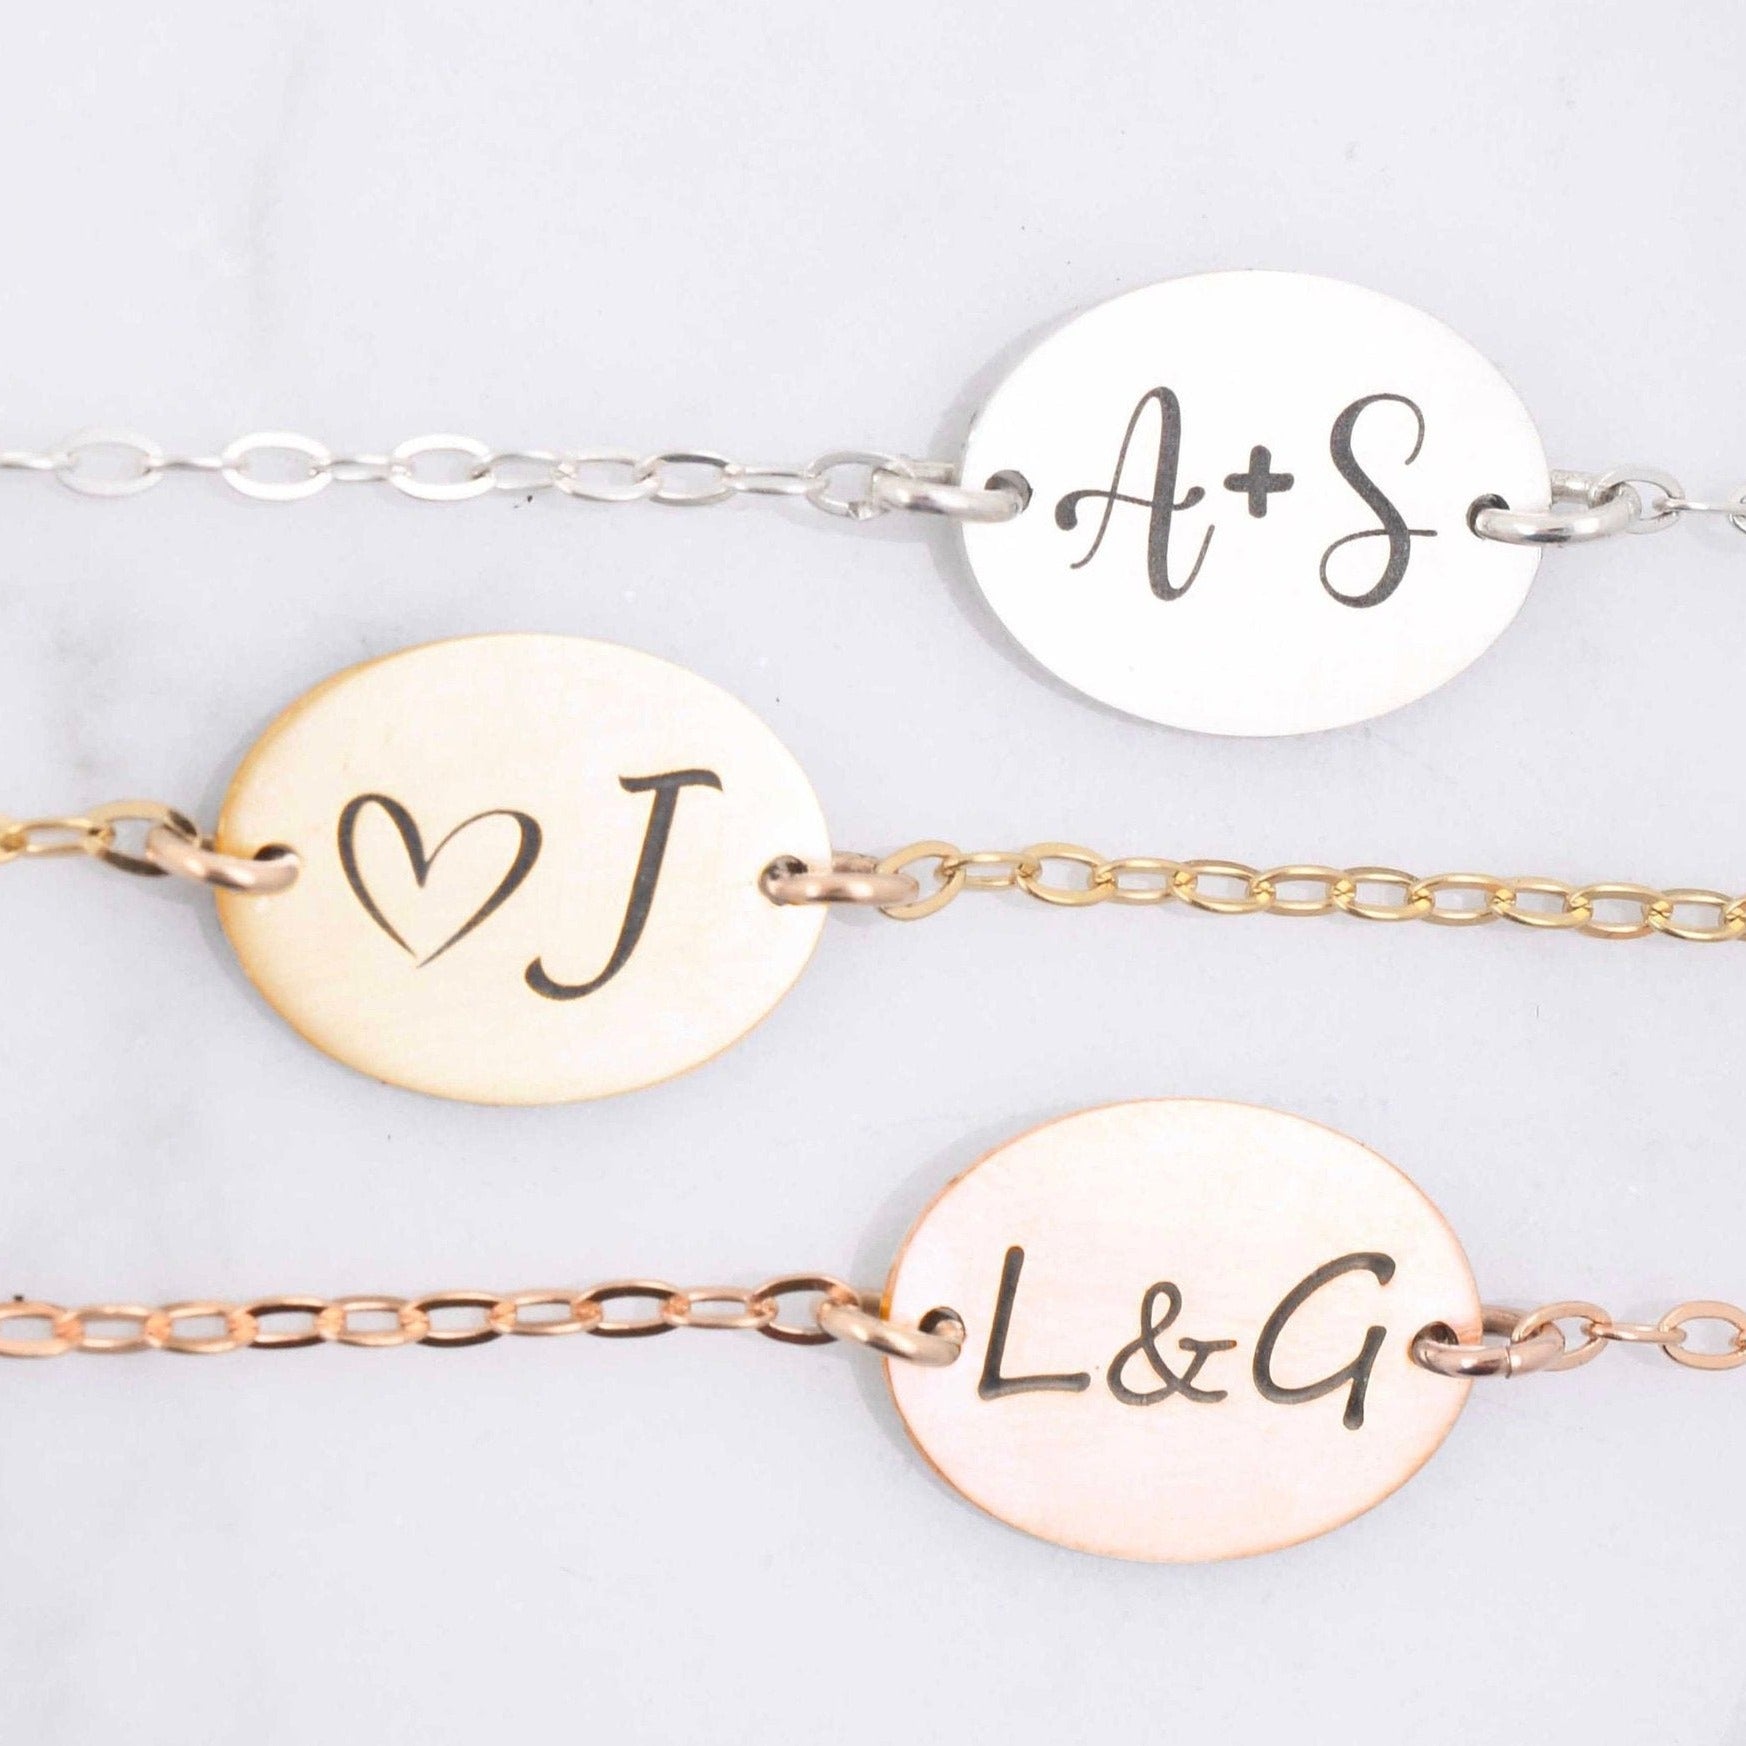 Monogram Bracelet or Anklet with Personalized Initials & Triple Chain -  Solid Gold, Sterling Silver, Yellow Gold or Rose Gold